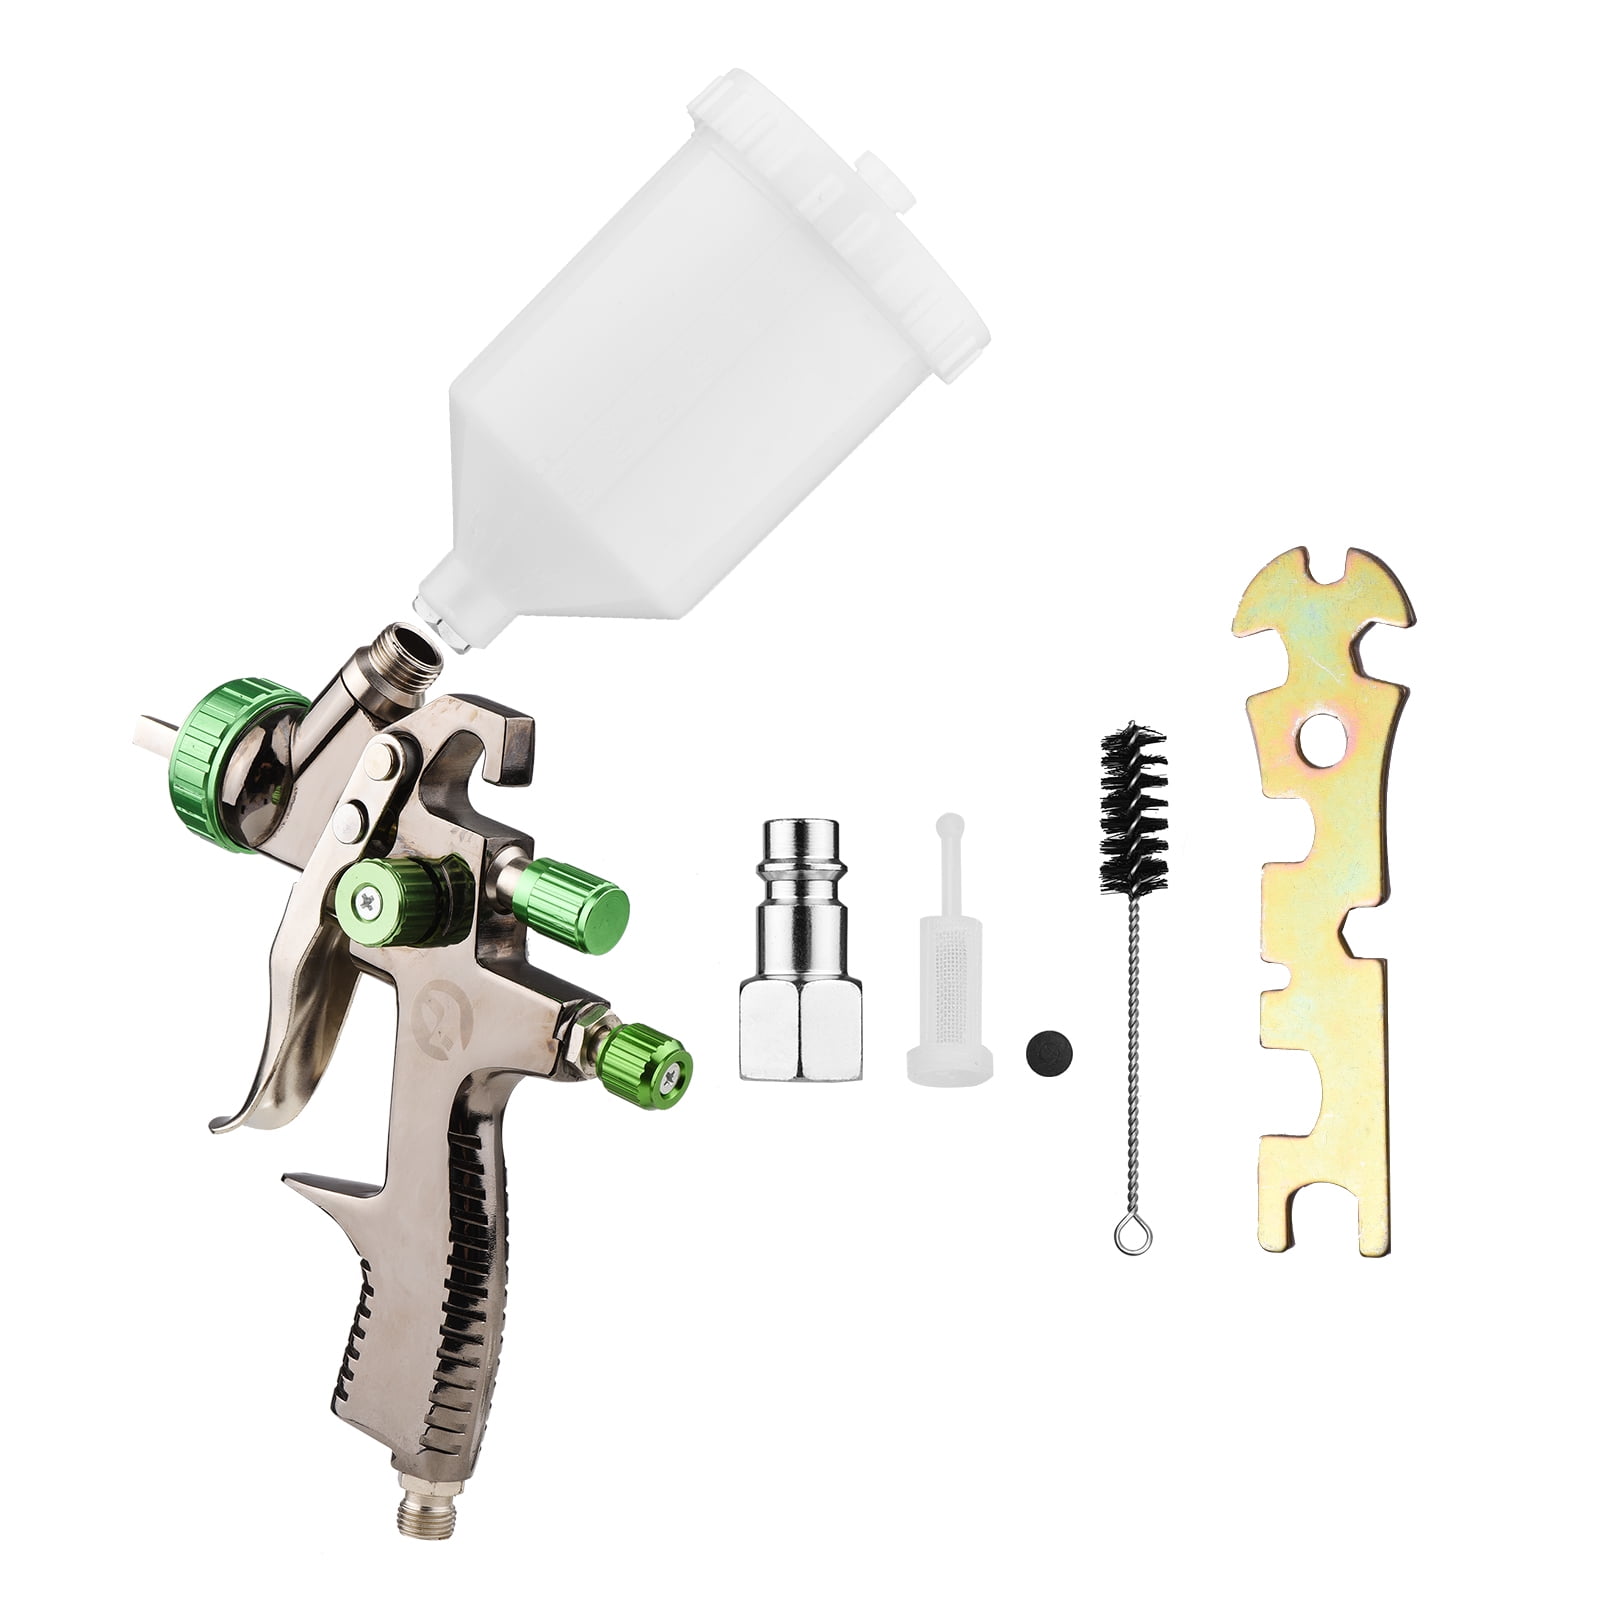 VEVOR LVLP Auto Paint Spray Gun, High Performance Paint Sprayer Gun with 1.3/1.4/1.8mm Nozzles 1000ml Capacity, MPS Adapter and Air Regulator for